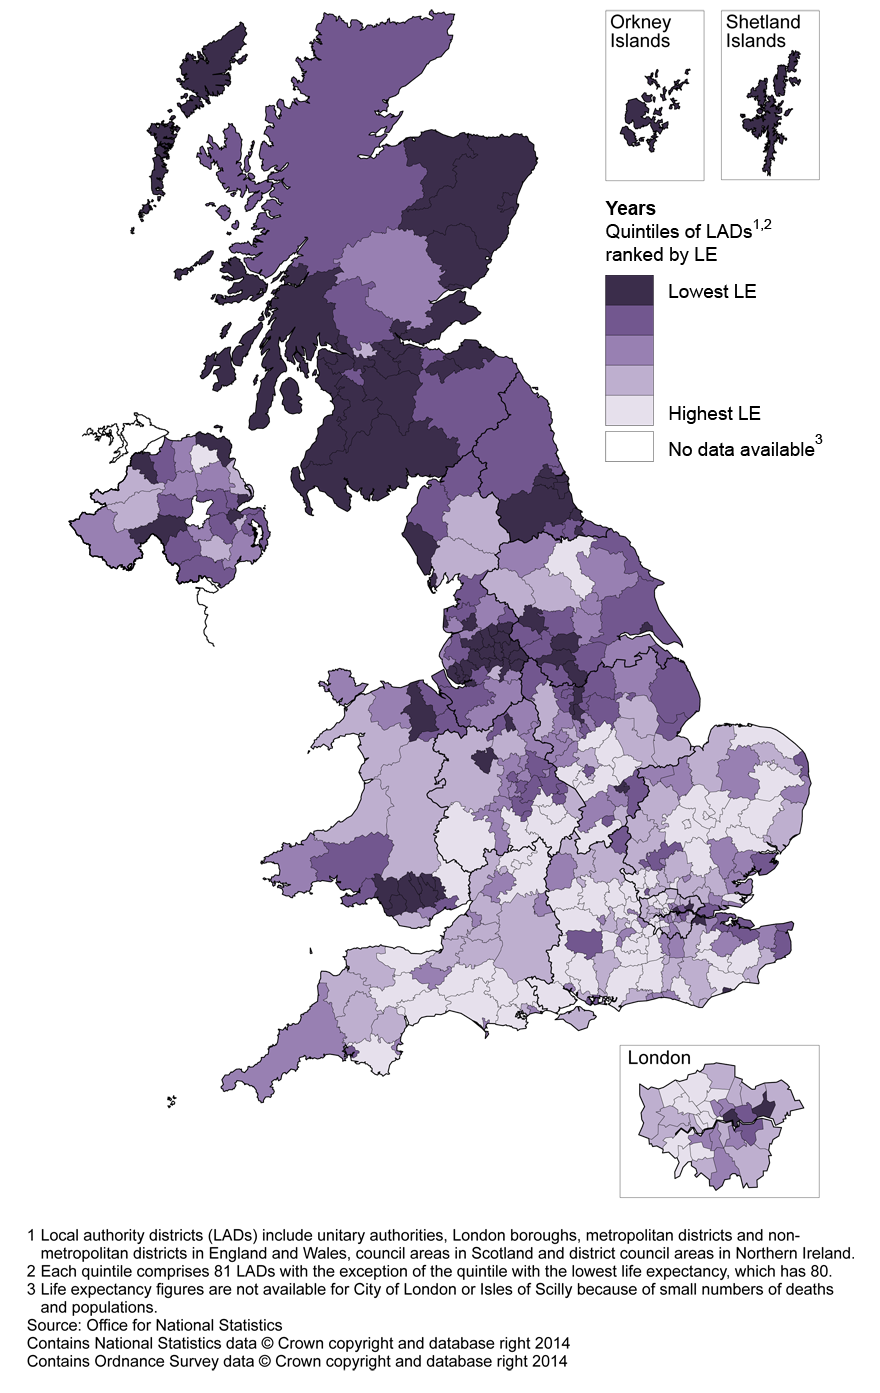 Map 4: Life expectancy (LE) for females at age 65 by local authority district, United Kingdom, 2010–12